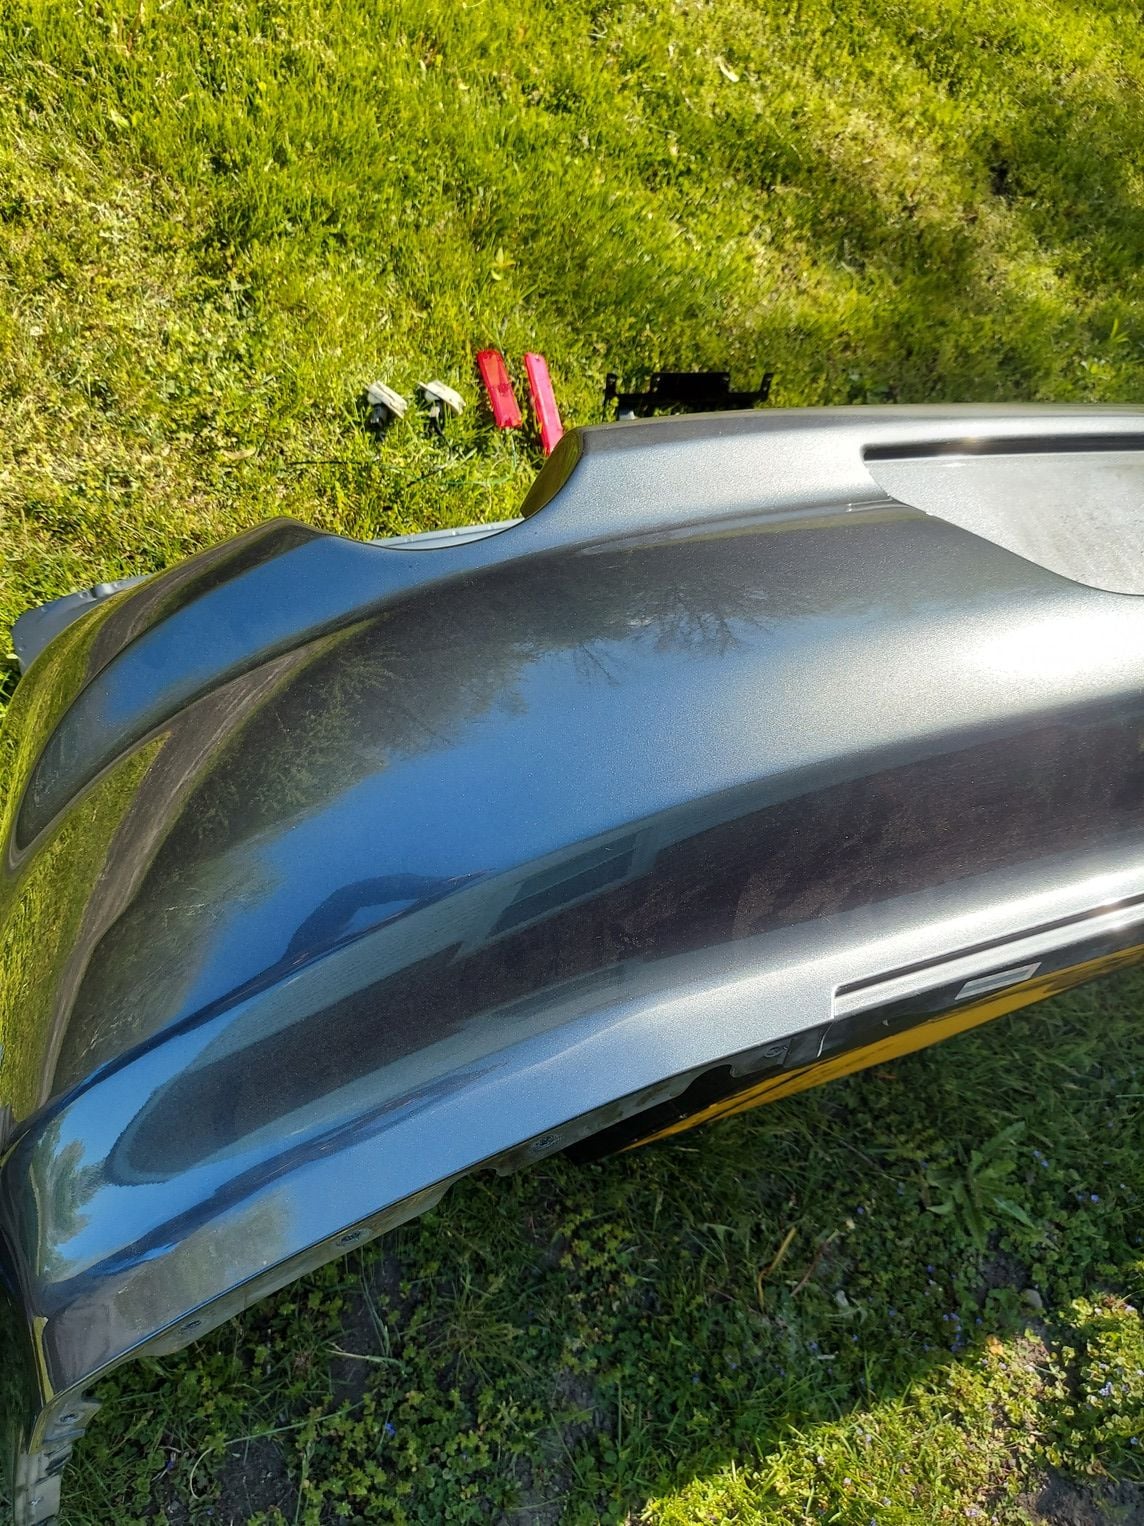 Exterior Body Parts - Flawless condition Evo-9 Rear bumper and related parts - Used - 2003 to 2006 Mitsubishi Lancer Evolution - Matteson, IL 60443, United States